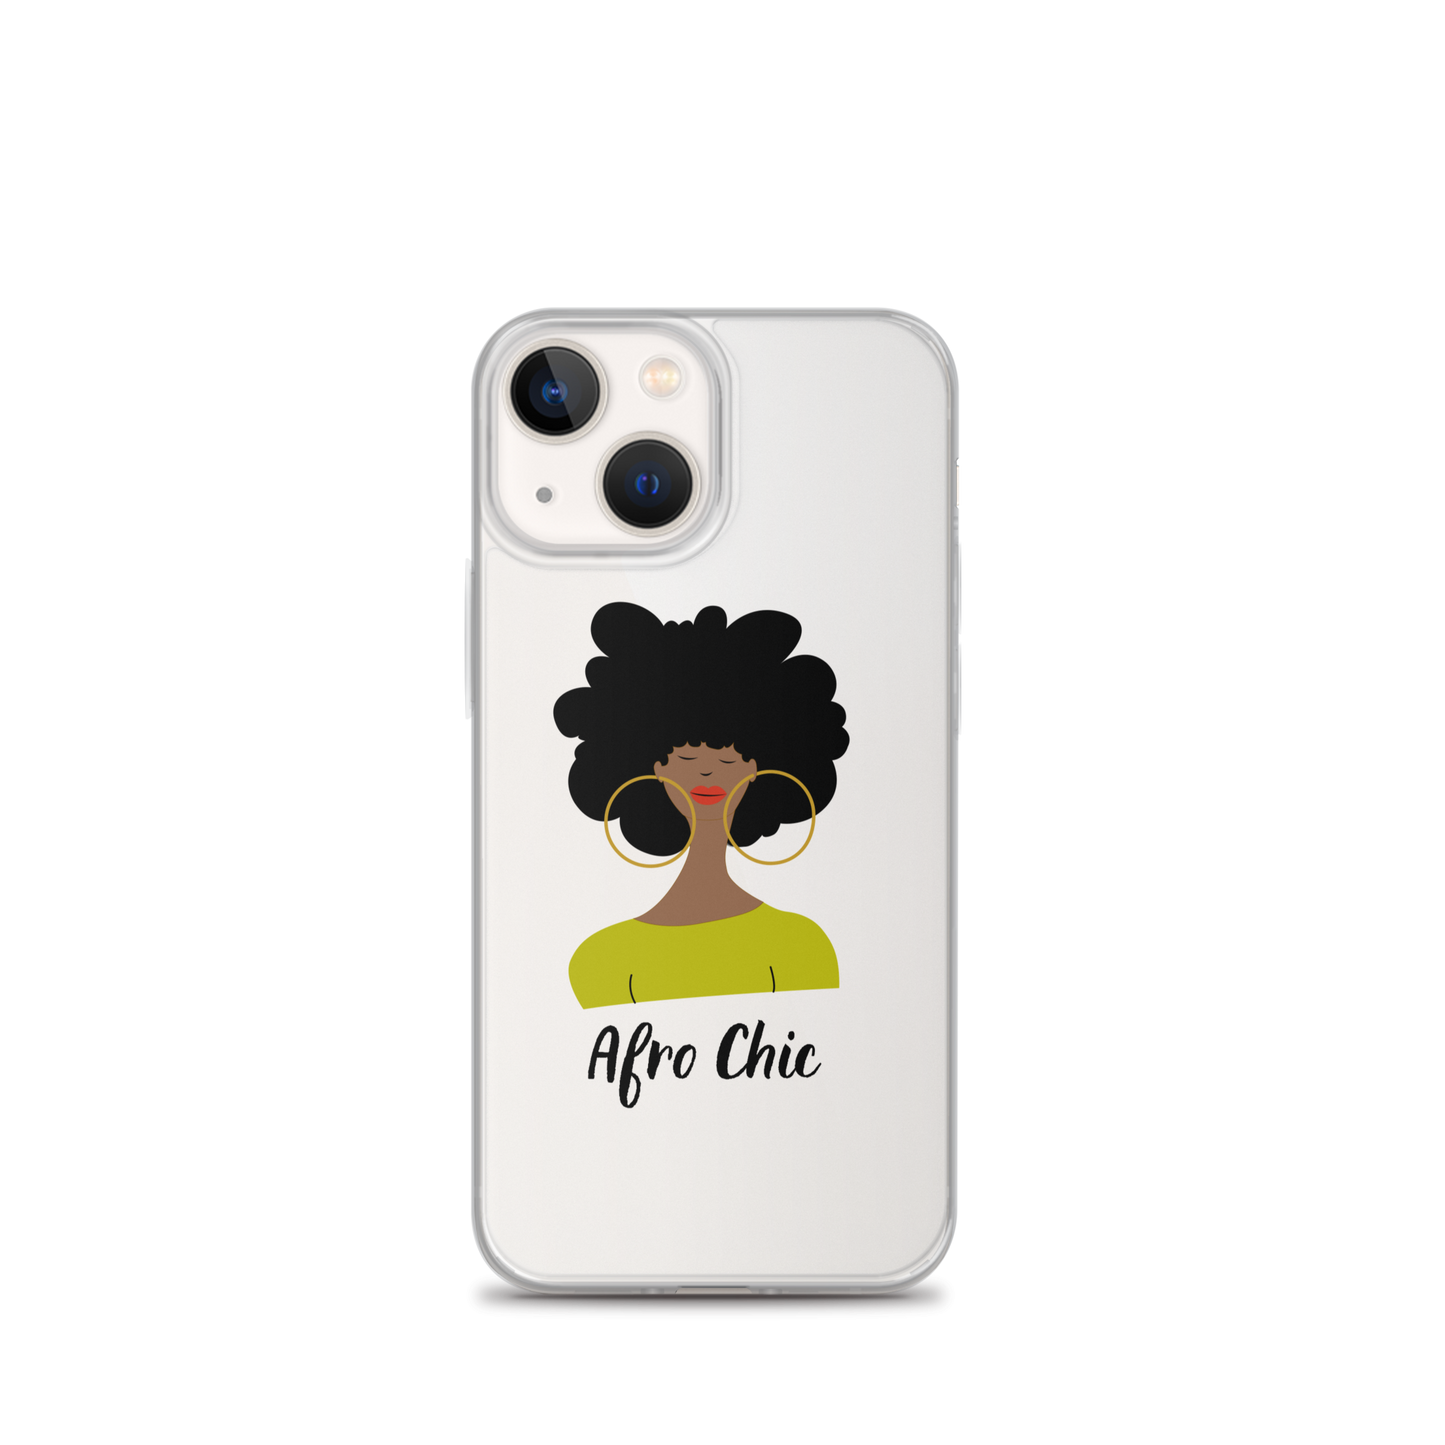 Afro Chic iPhone Case